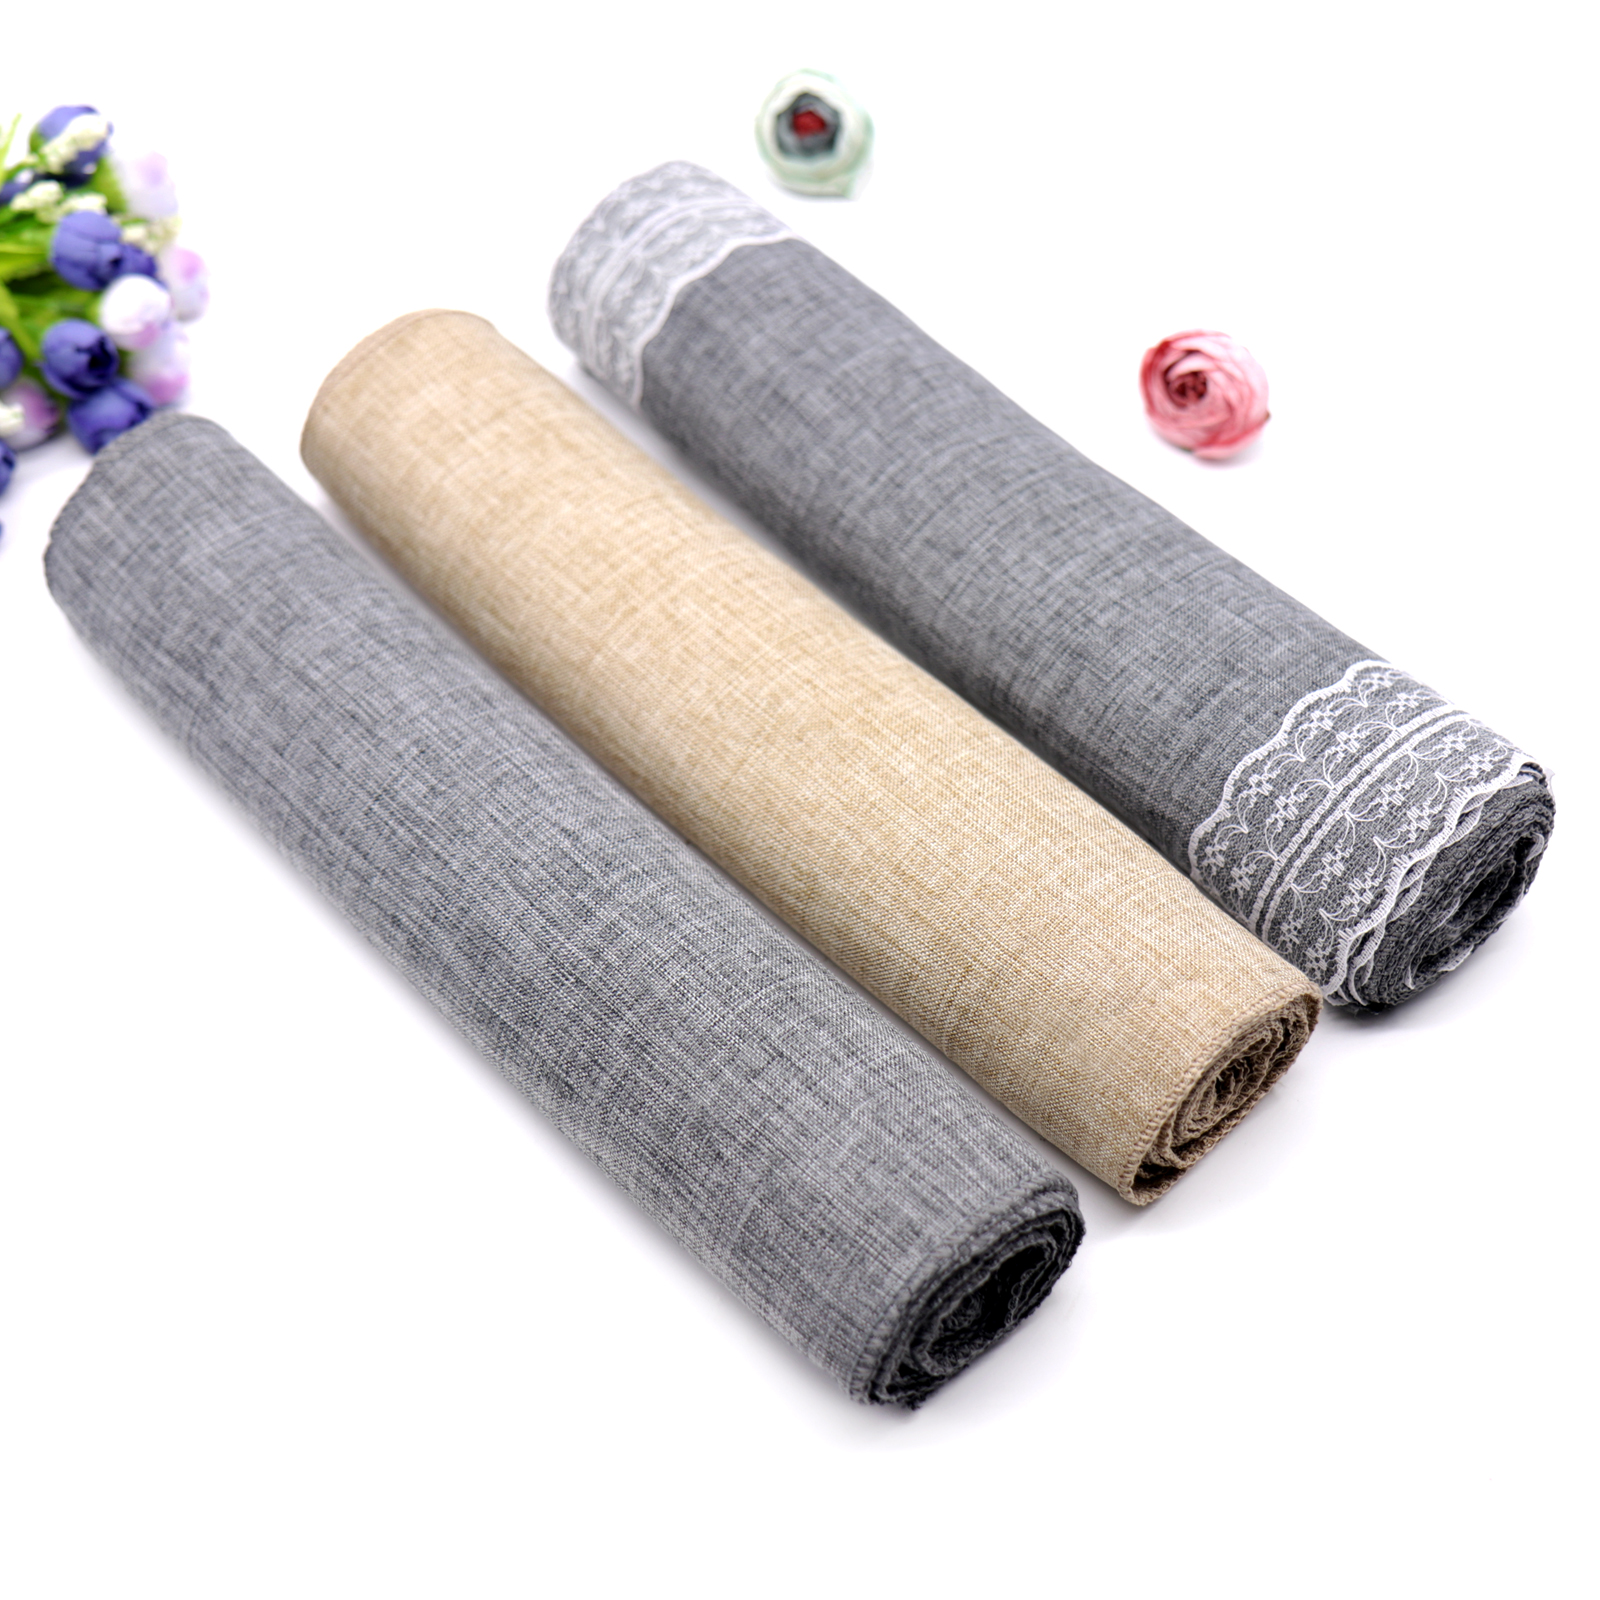 Table Runner Jute Imitated Linen Tablecloth Rustic Wedding Party Banquet Decoration Home Textiles Overlay Dinning Table Decor